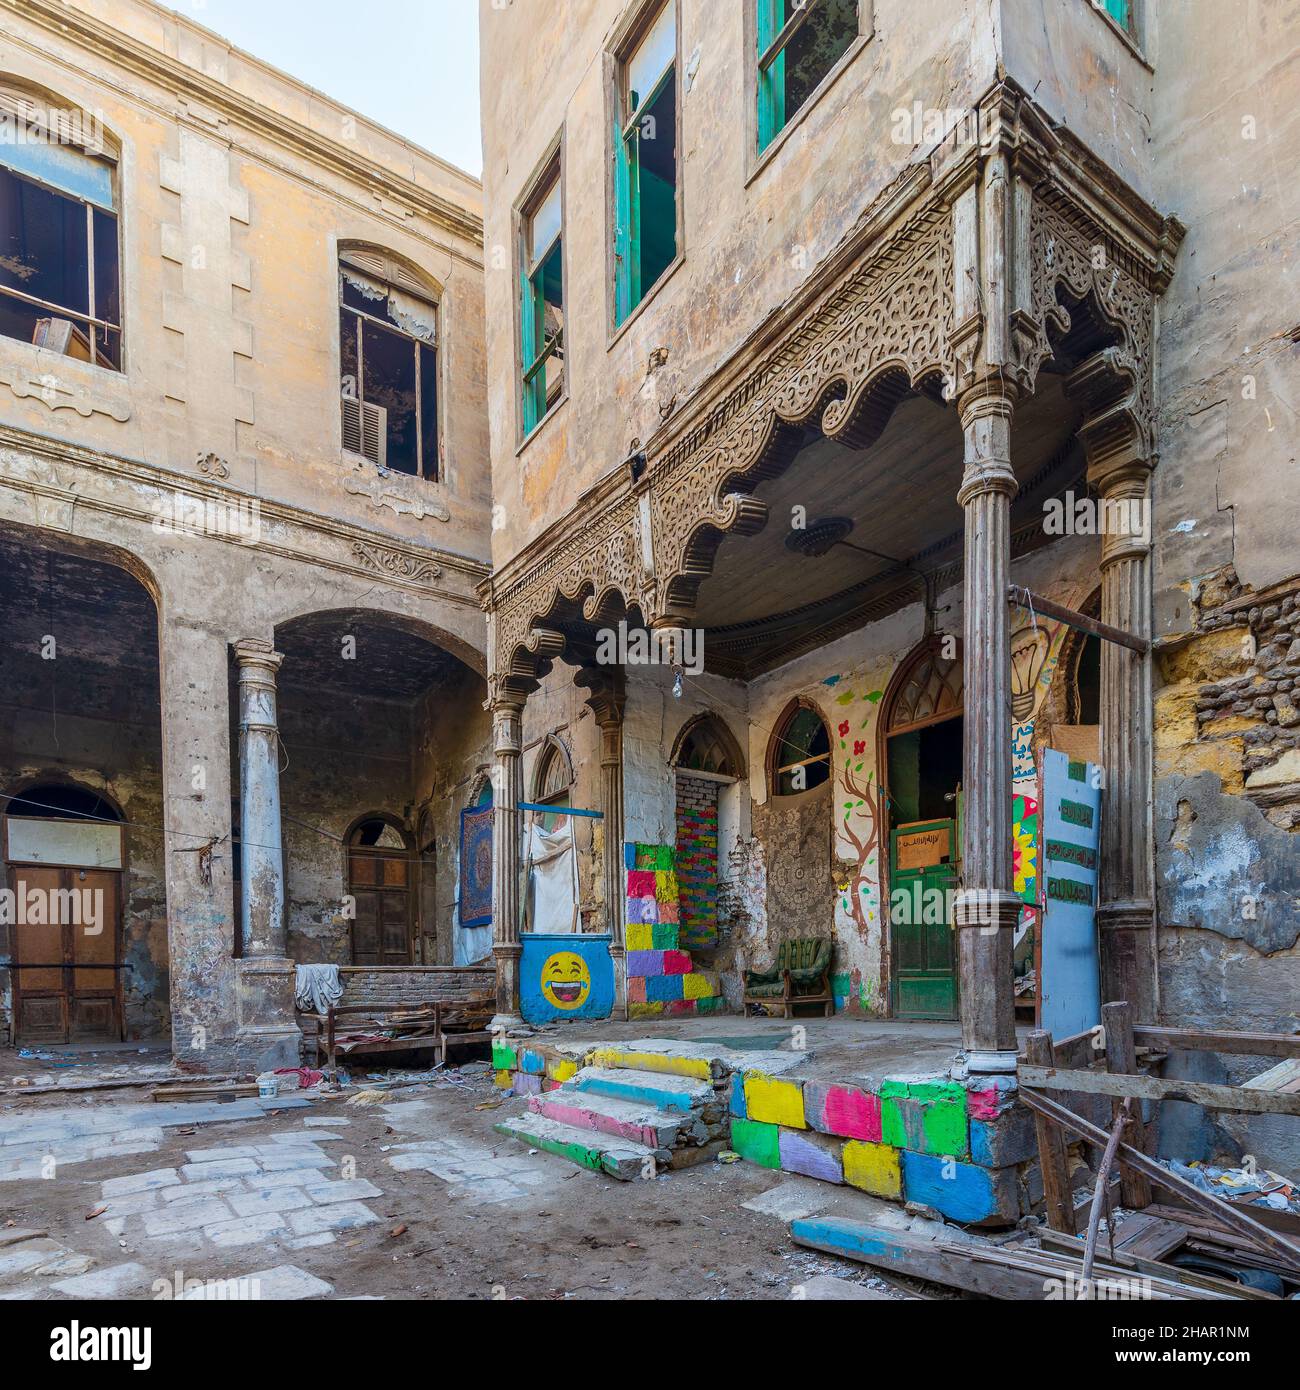 Day shot of Bayt Madkour Pasha, historical abandoned house located at Souq Al Selah Street, Darb Al Ahmar district, Old Cairo, Egypt Stock Photo